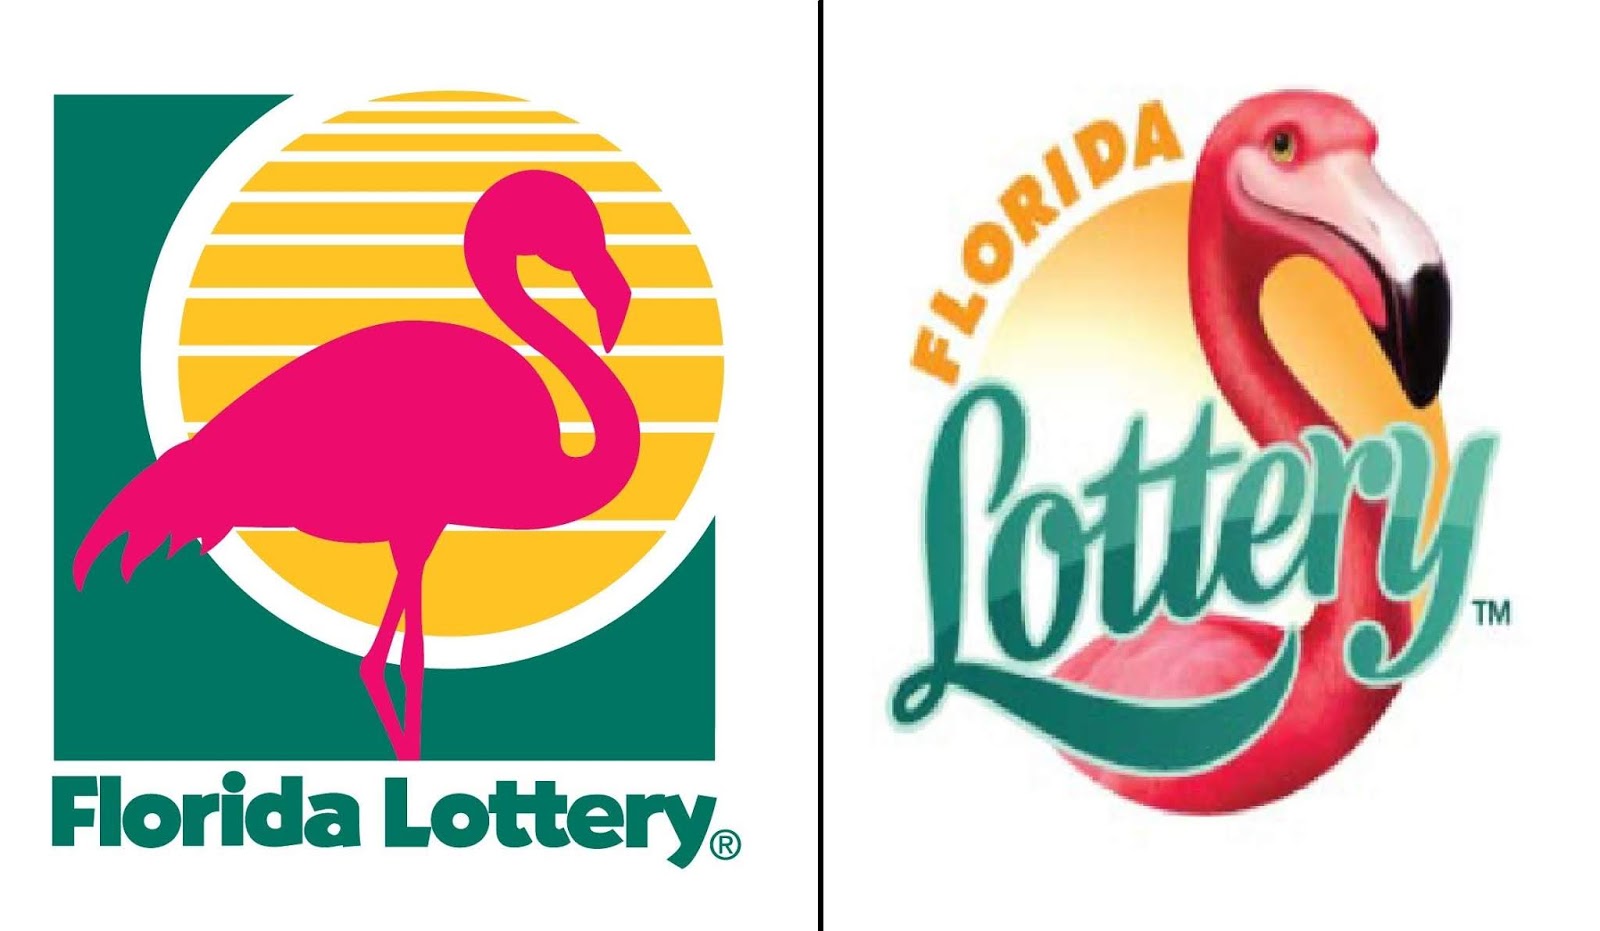 Florida Lottery Winning Numbers and How to Check - 2020 Updated Guide